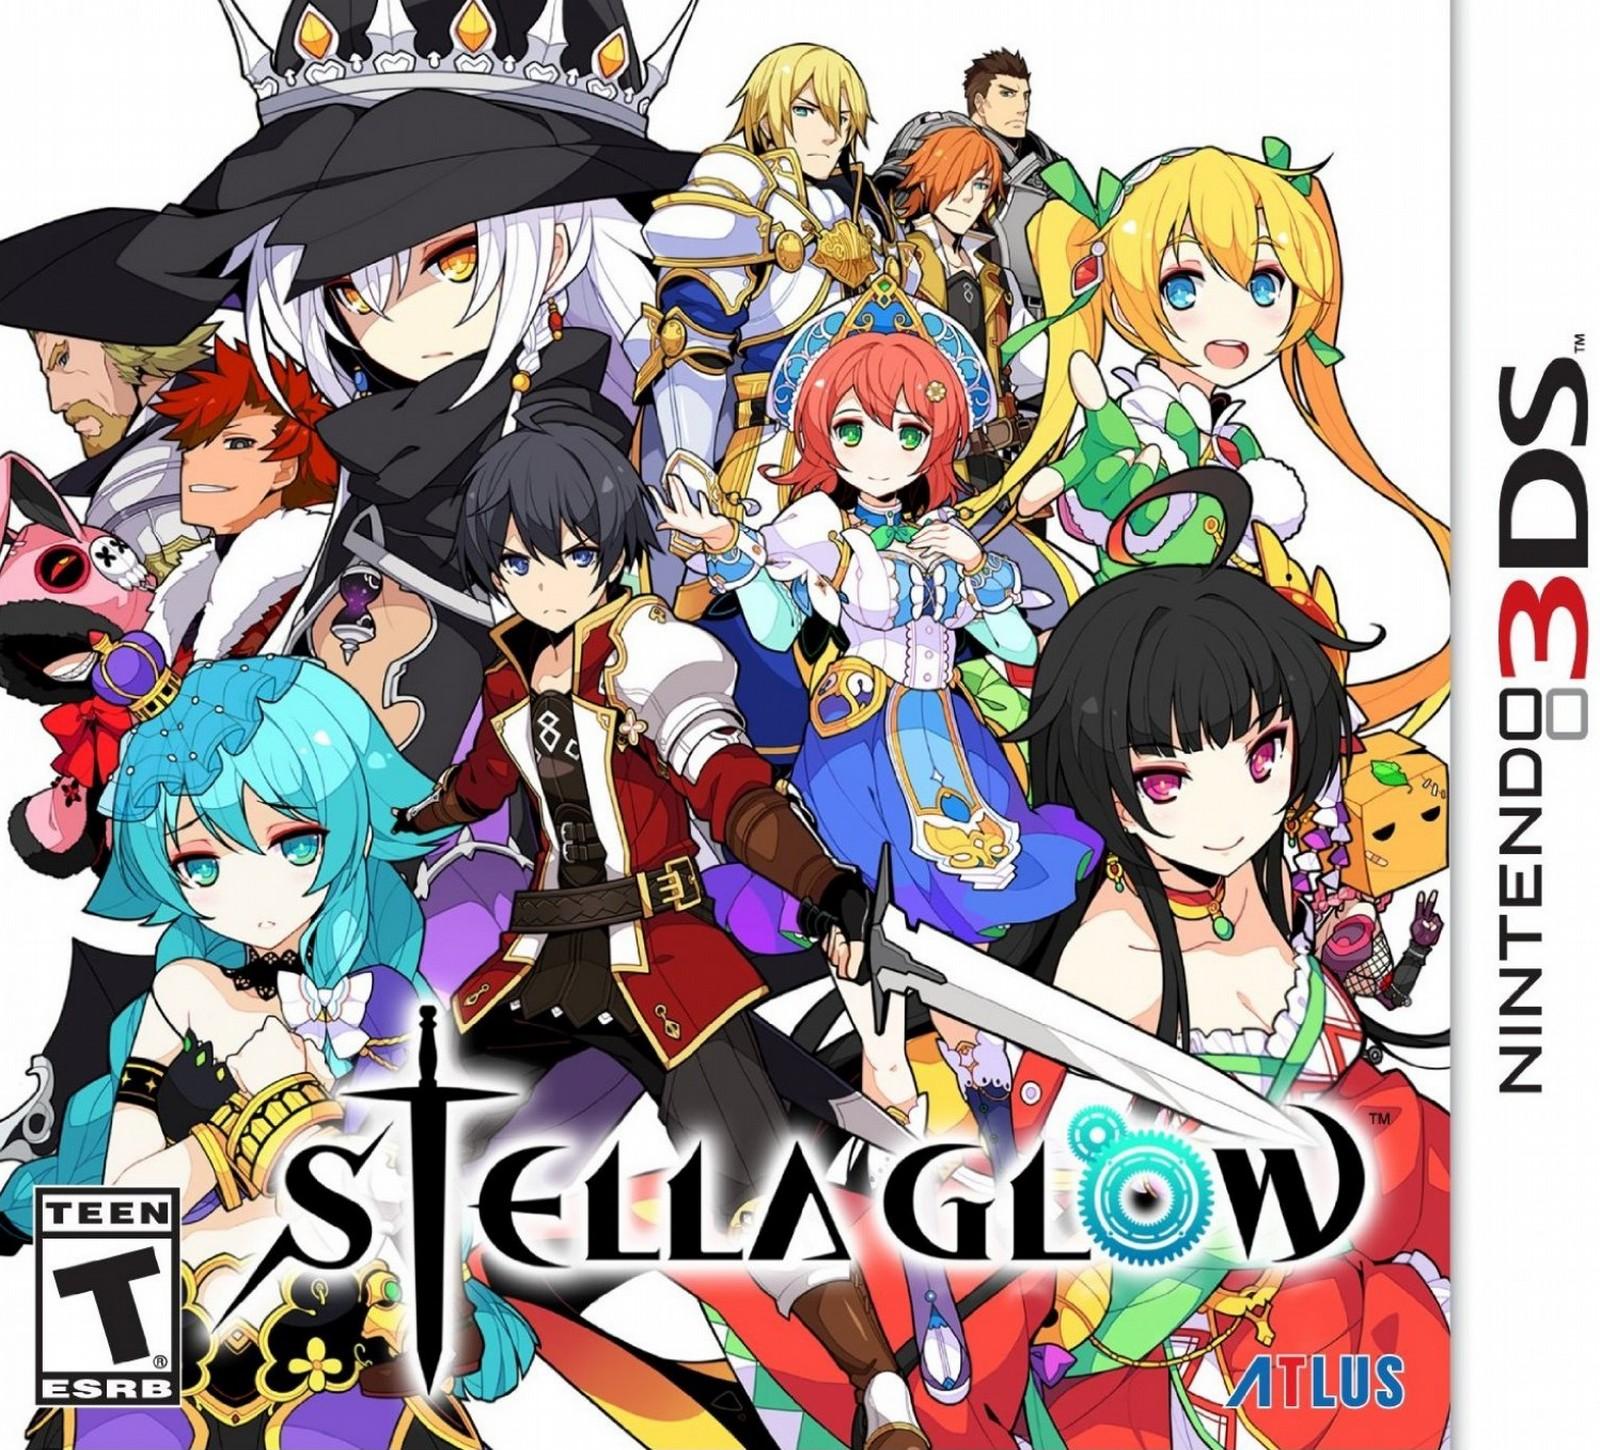 Stella Glow Nintendo 3DS Download for $9.99